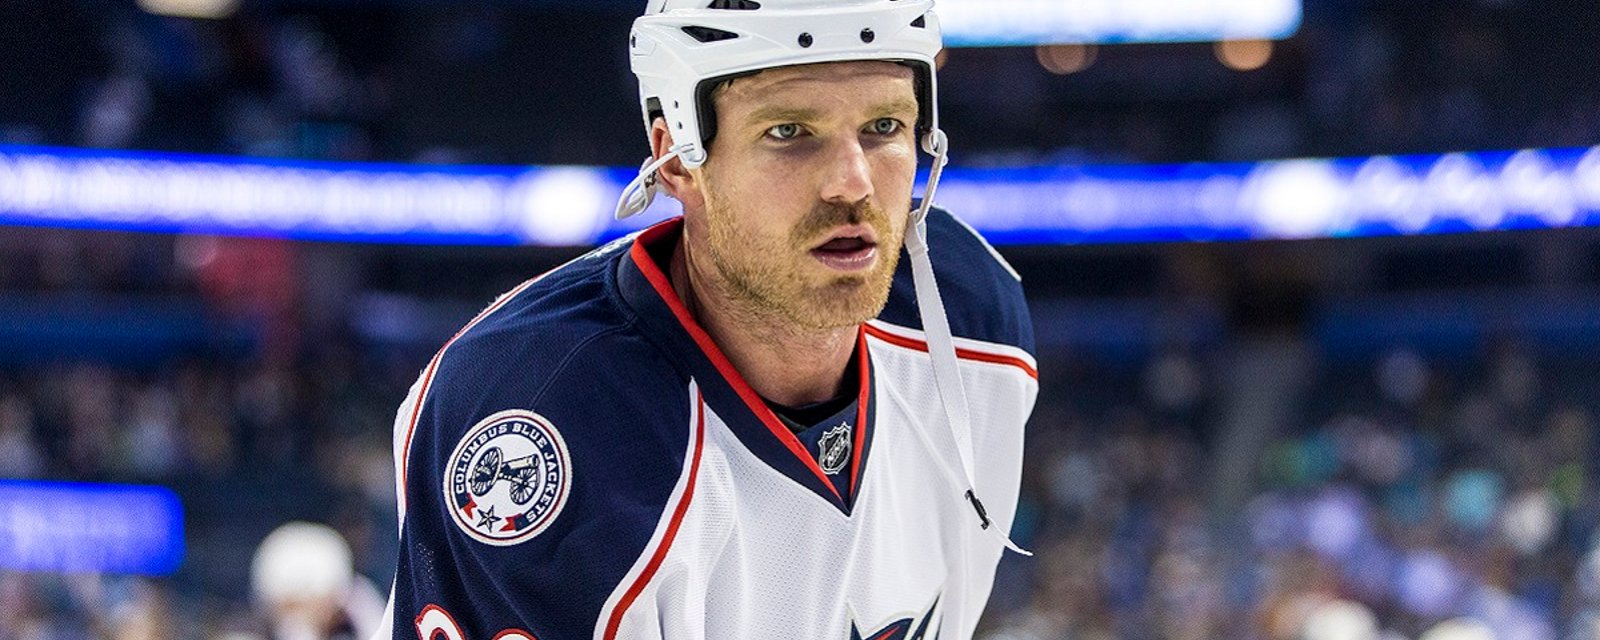 David Clarkson's career has hit an all-time low point.